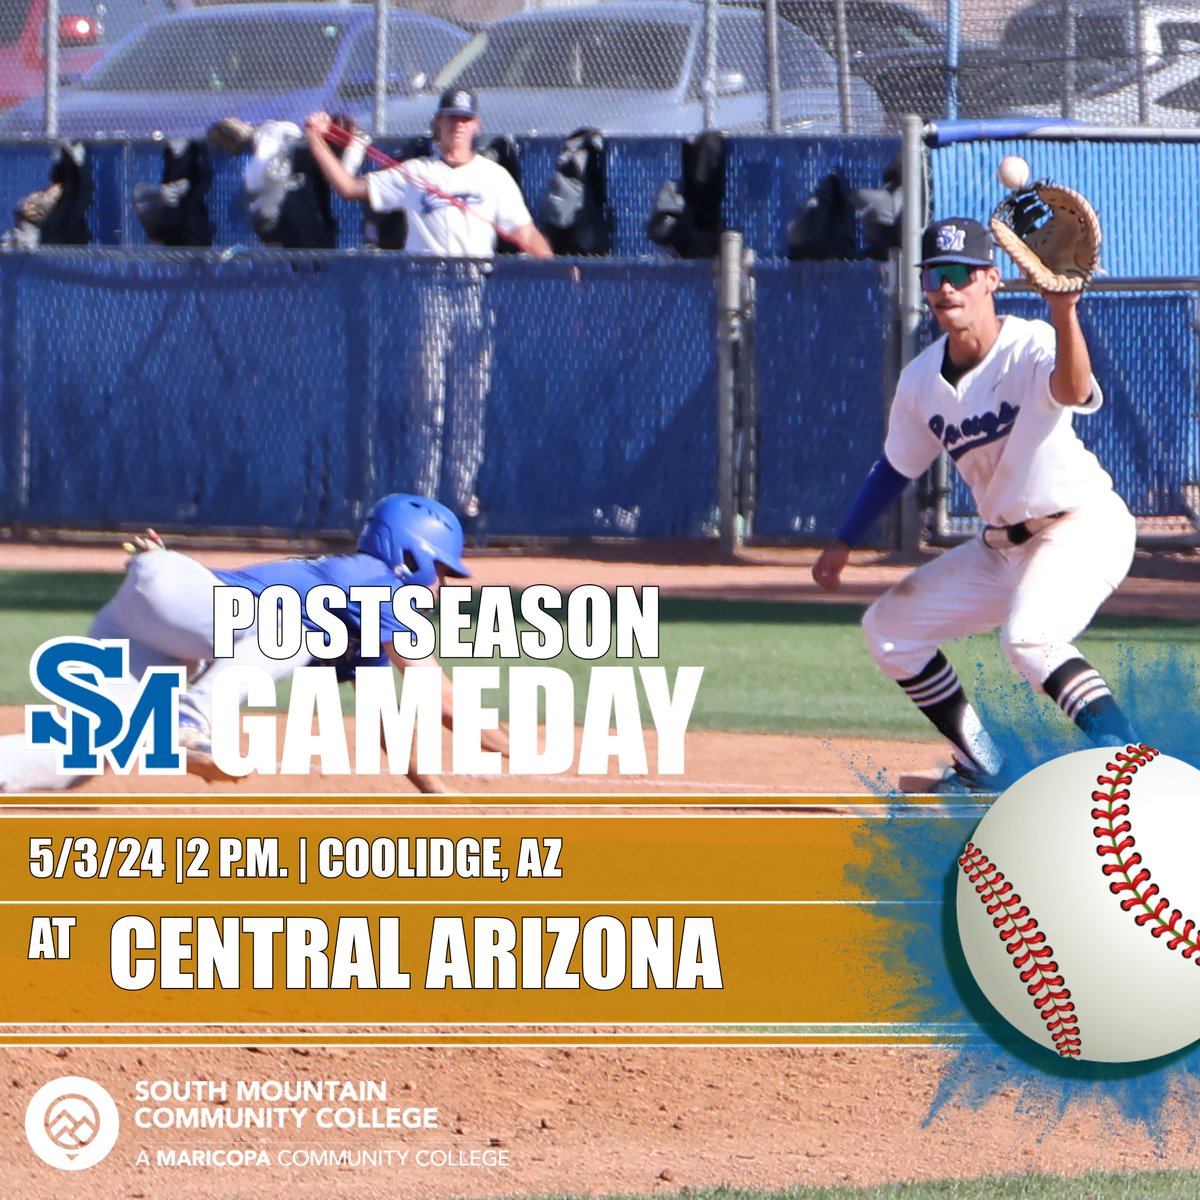 POSTSEASON GAMEDAY! @SoMtnBaseball travels to Central Arizona for a Region I Division I semifinal at 2 p.m. Follow along with live stats on the @GCsports app! If you can't make it, stream the game live for free here: tsbnsports.com/2024-njcaa-reg… 🐾⚾️